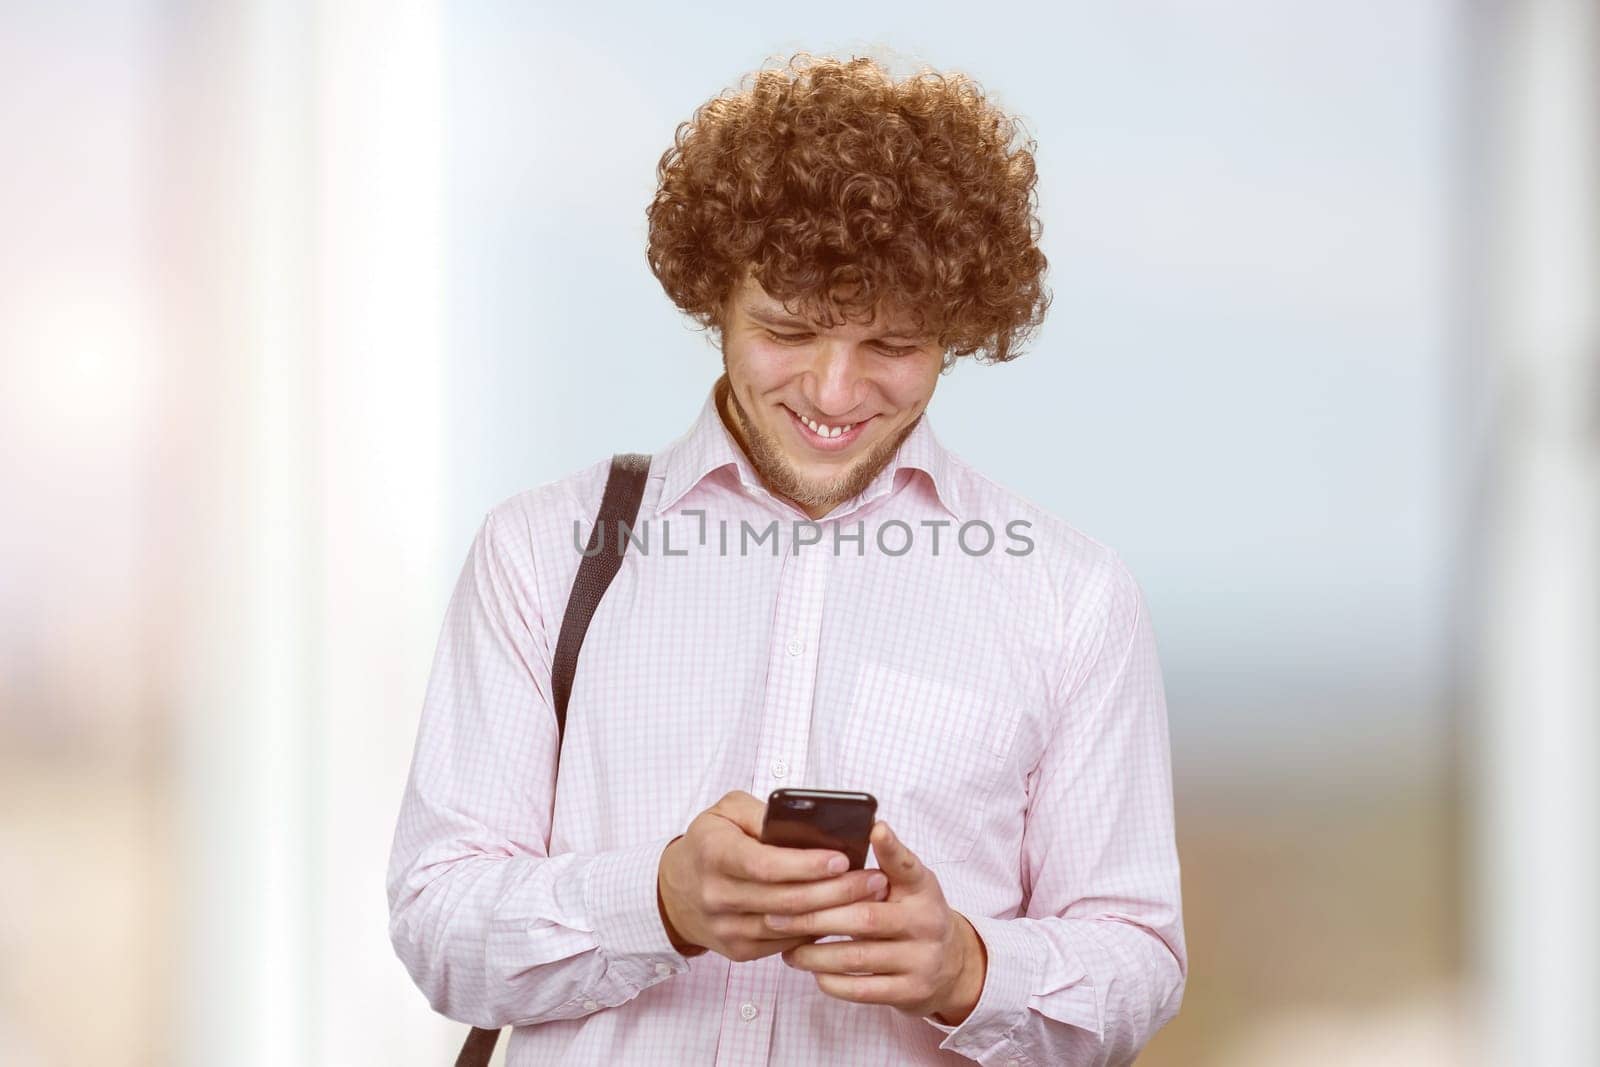 Portrait of a young smiling man with curly hair using his smartphone indoors. Indoor window in the background.